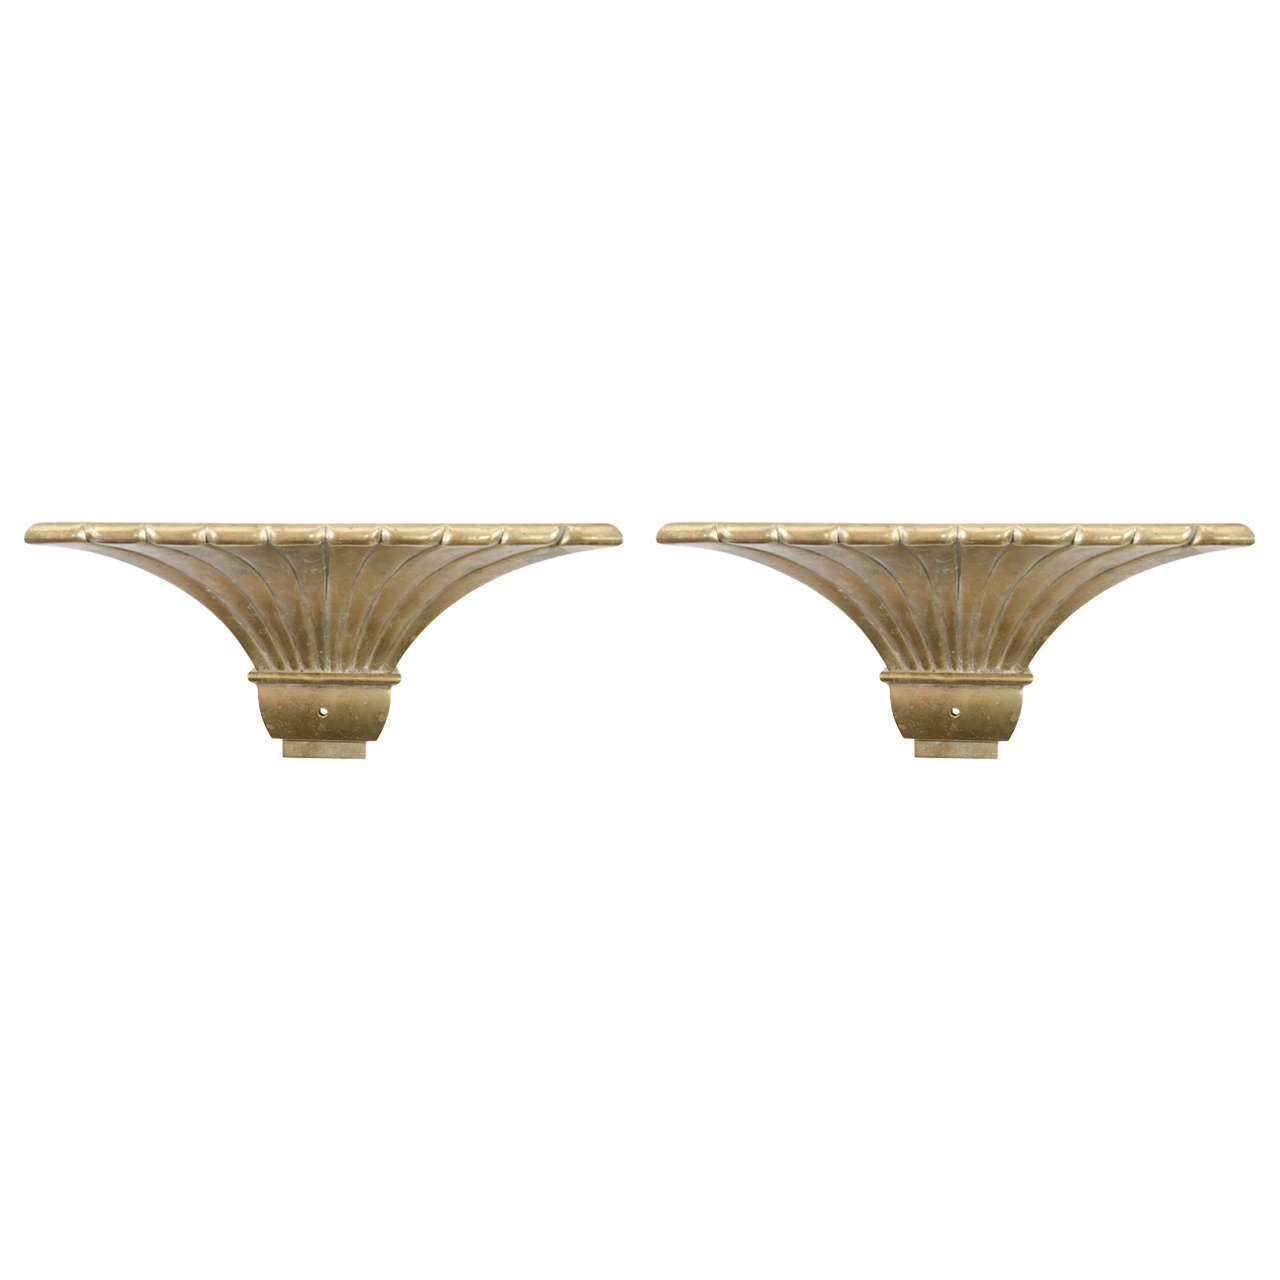 Midcentury Pair of Brass Fluted Sconces in the Manner of Chapman